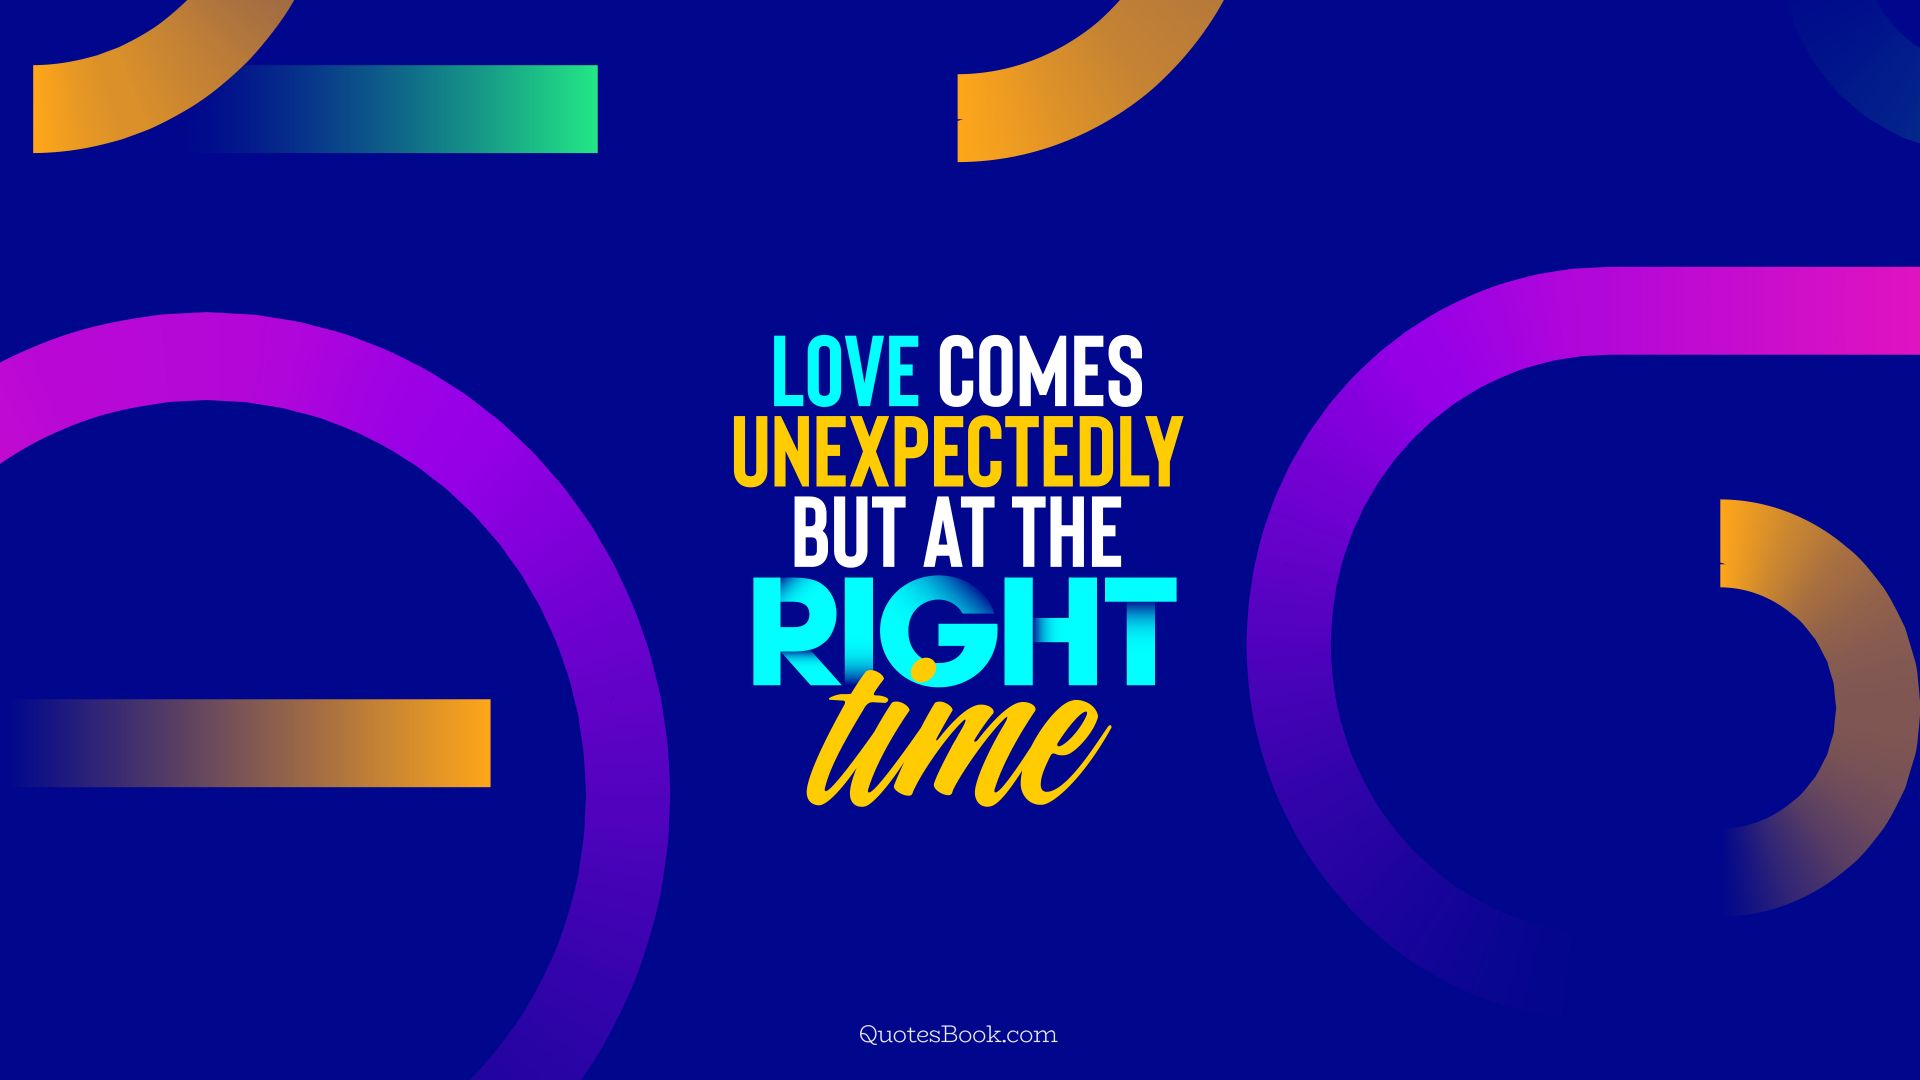 Love comes unexpectedly but at the right time. - Quote by QuotesBook